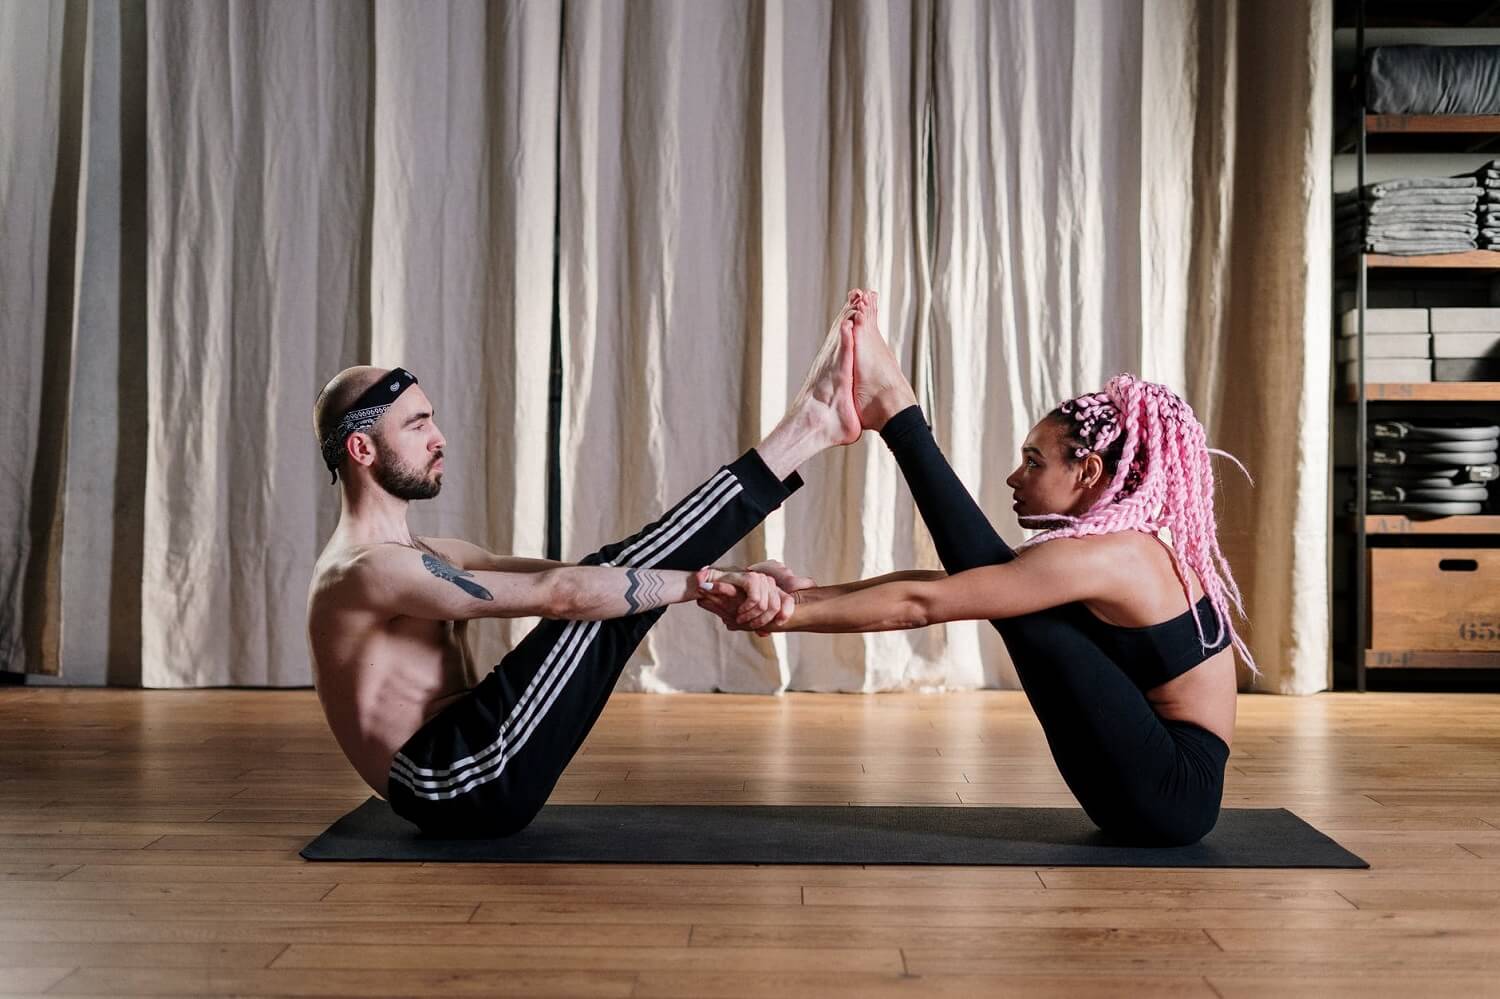 Couple Yoga Poses To Build Intimacy - Bold Outline : India's leading